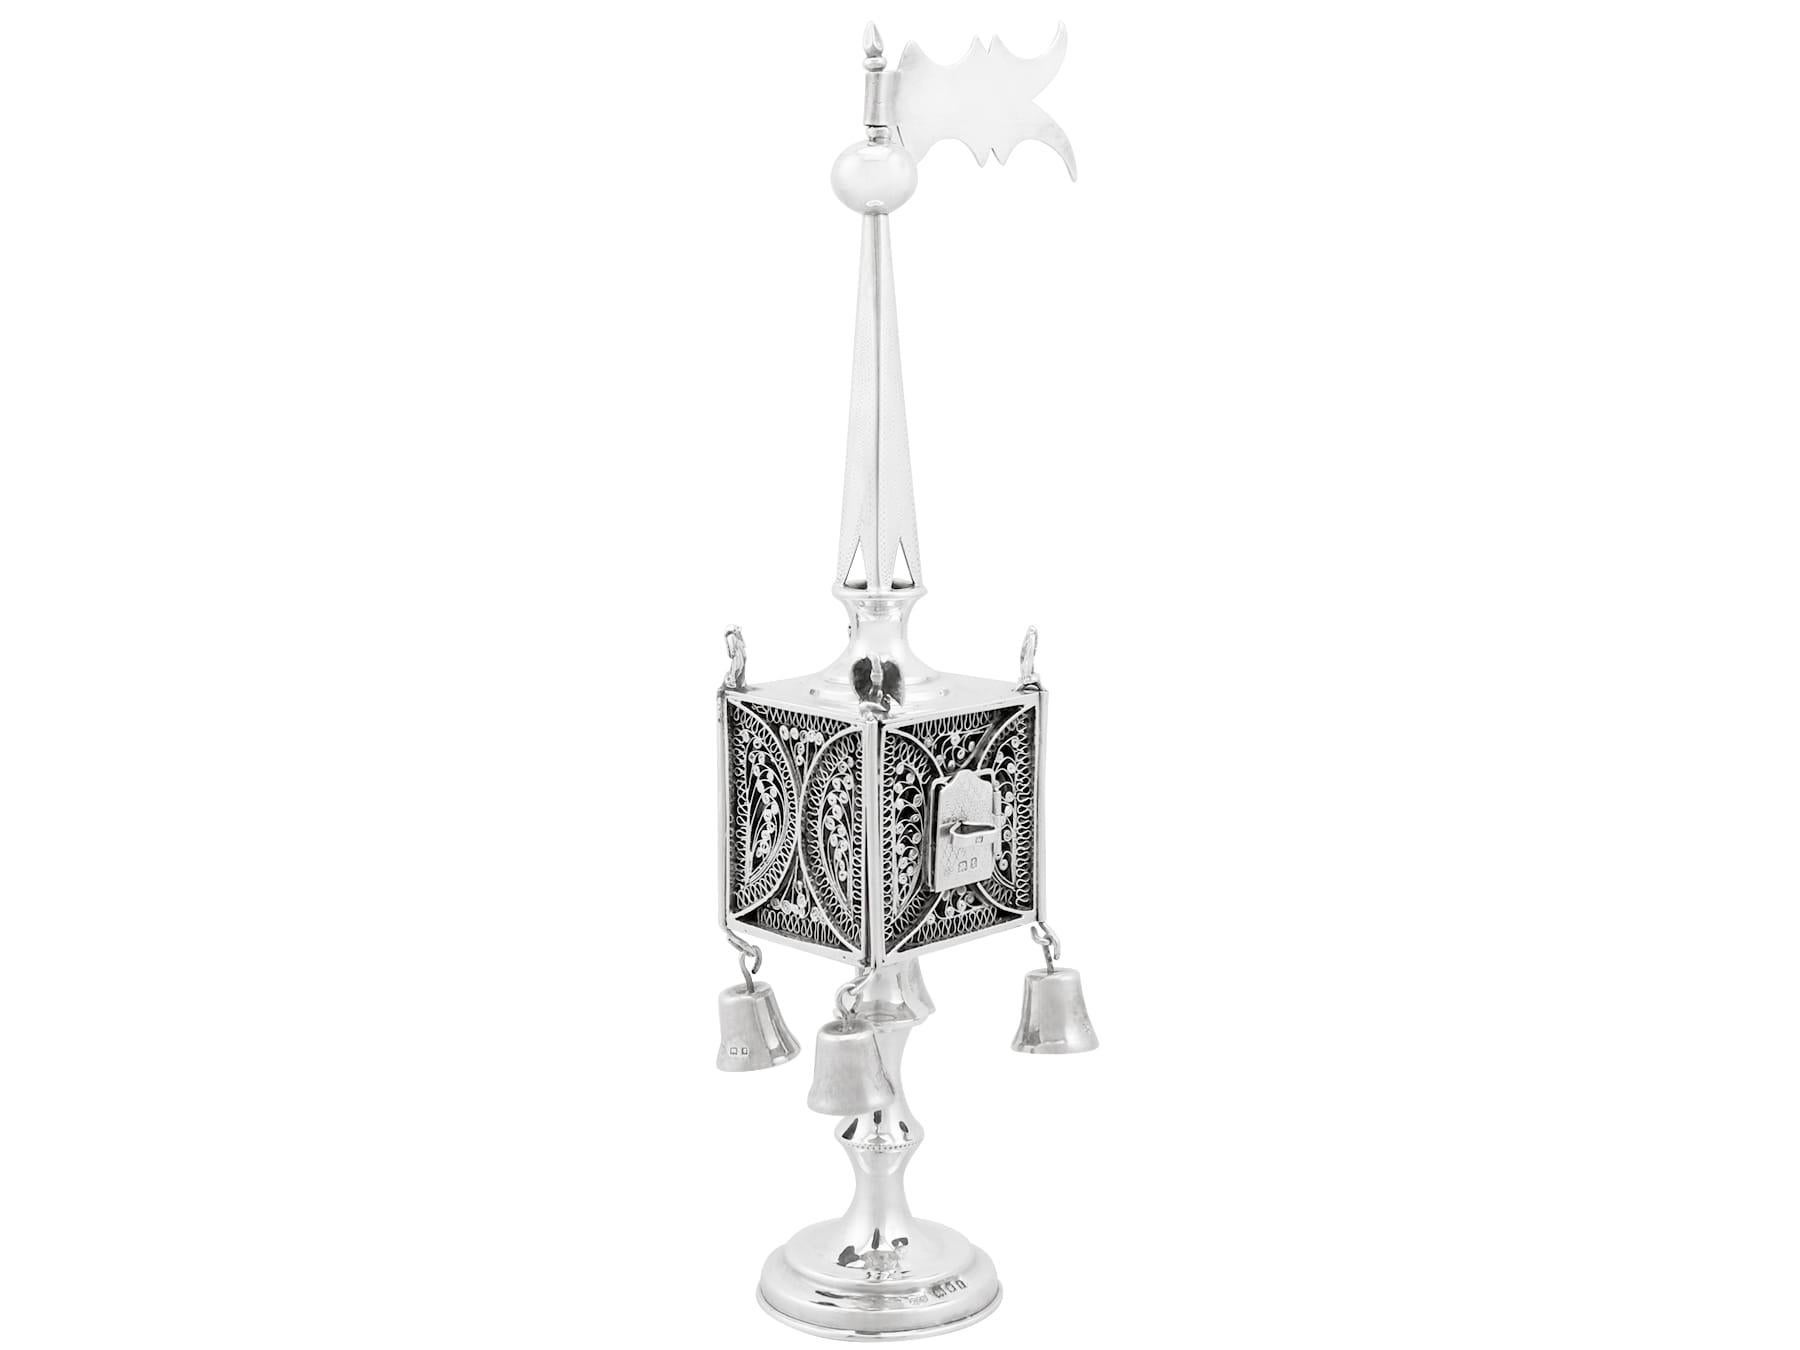 An exceptional, fine and impressive antique George V English sterling silver spice tower, an addition to our silver Judaica collection.

This exceptional antique George V sterling silver spice box has been modeled in the form of a tower.

The